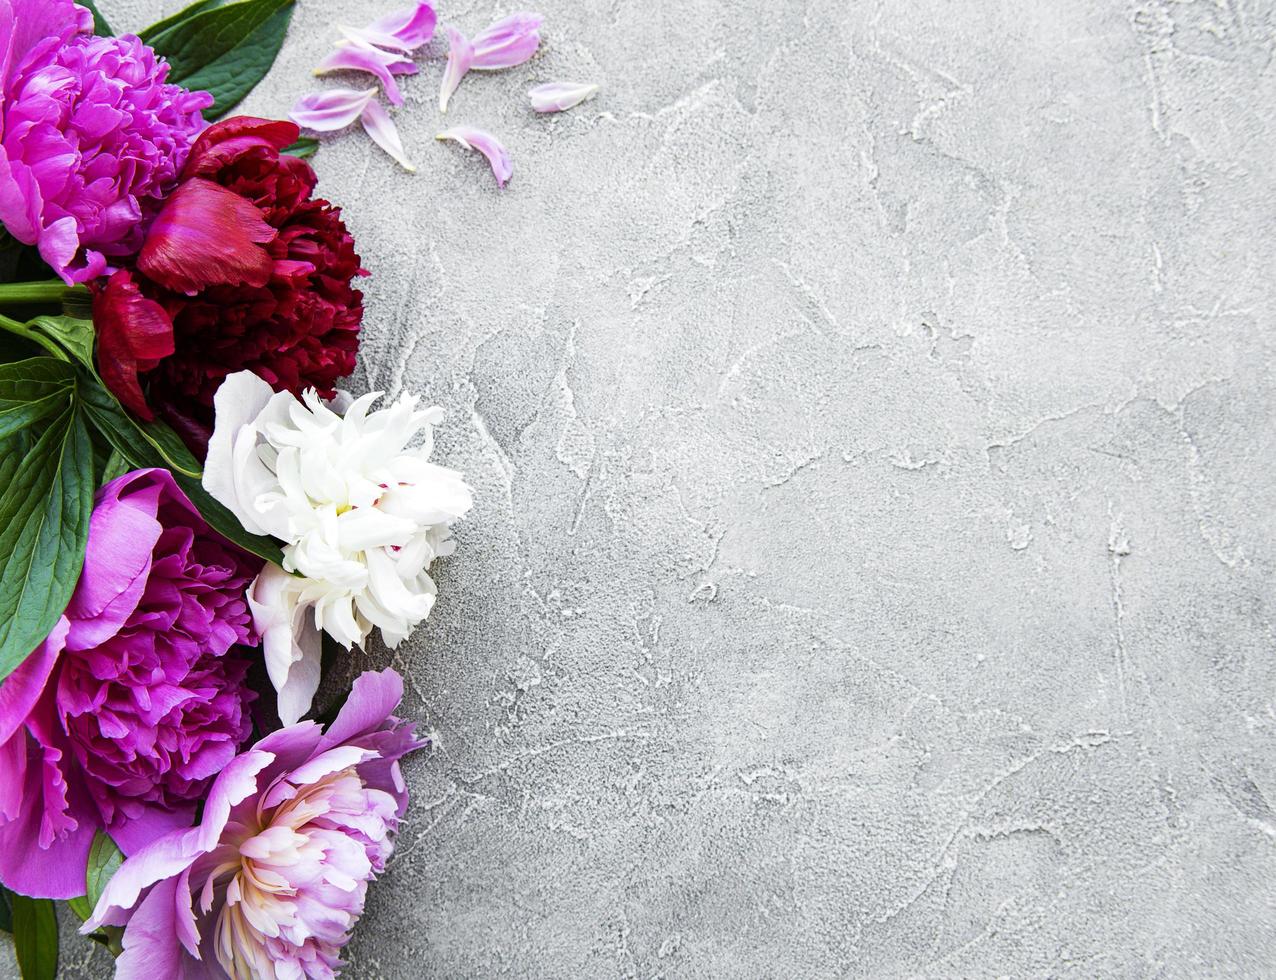 Peony flowers on a gray concrete background photo